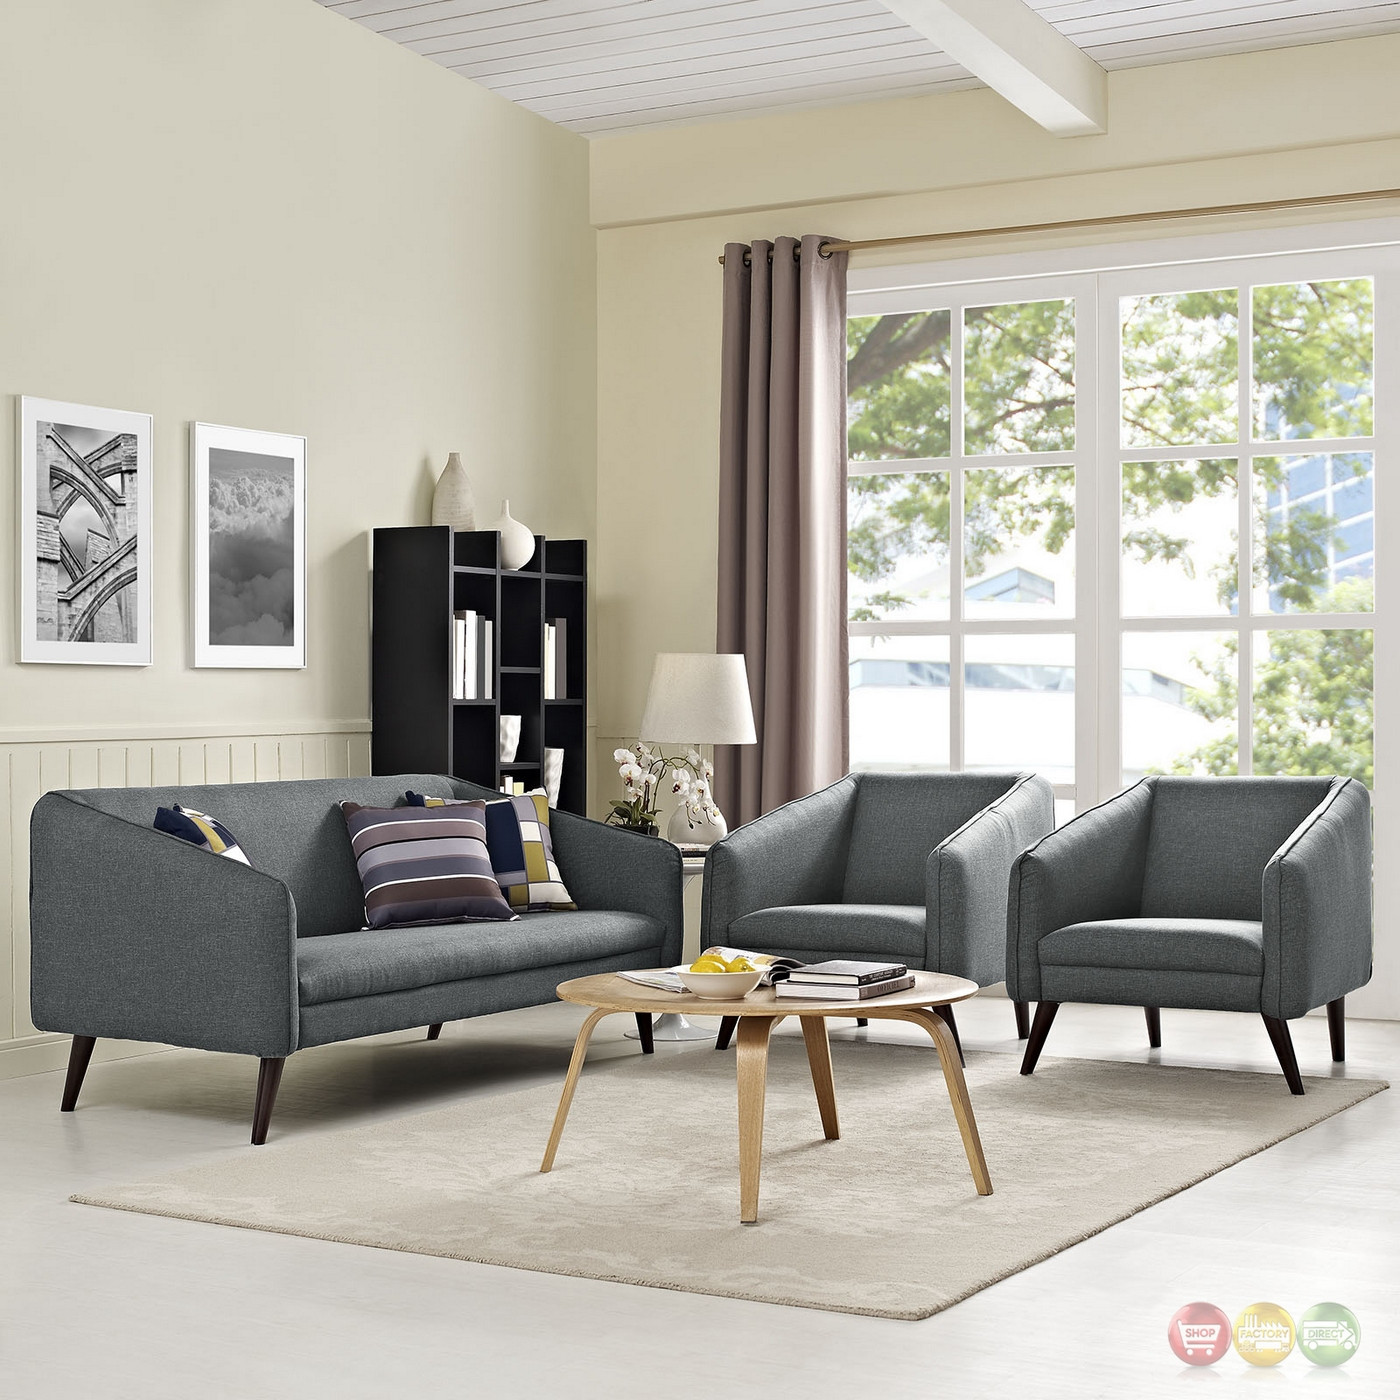 Armchairs For Living Room
 Slide Modern 3 pc Upholstered Sofa & Armchairs Living Room